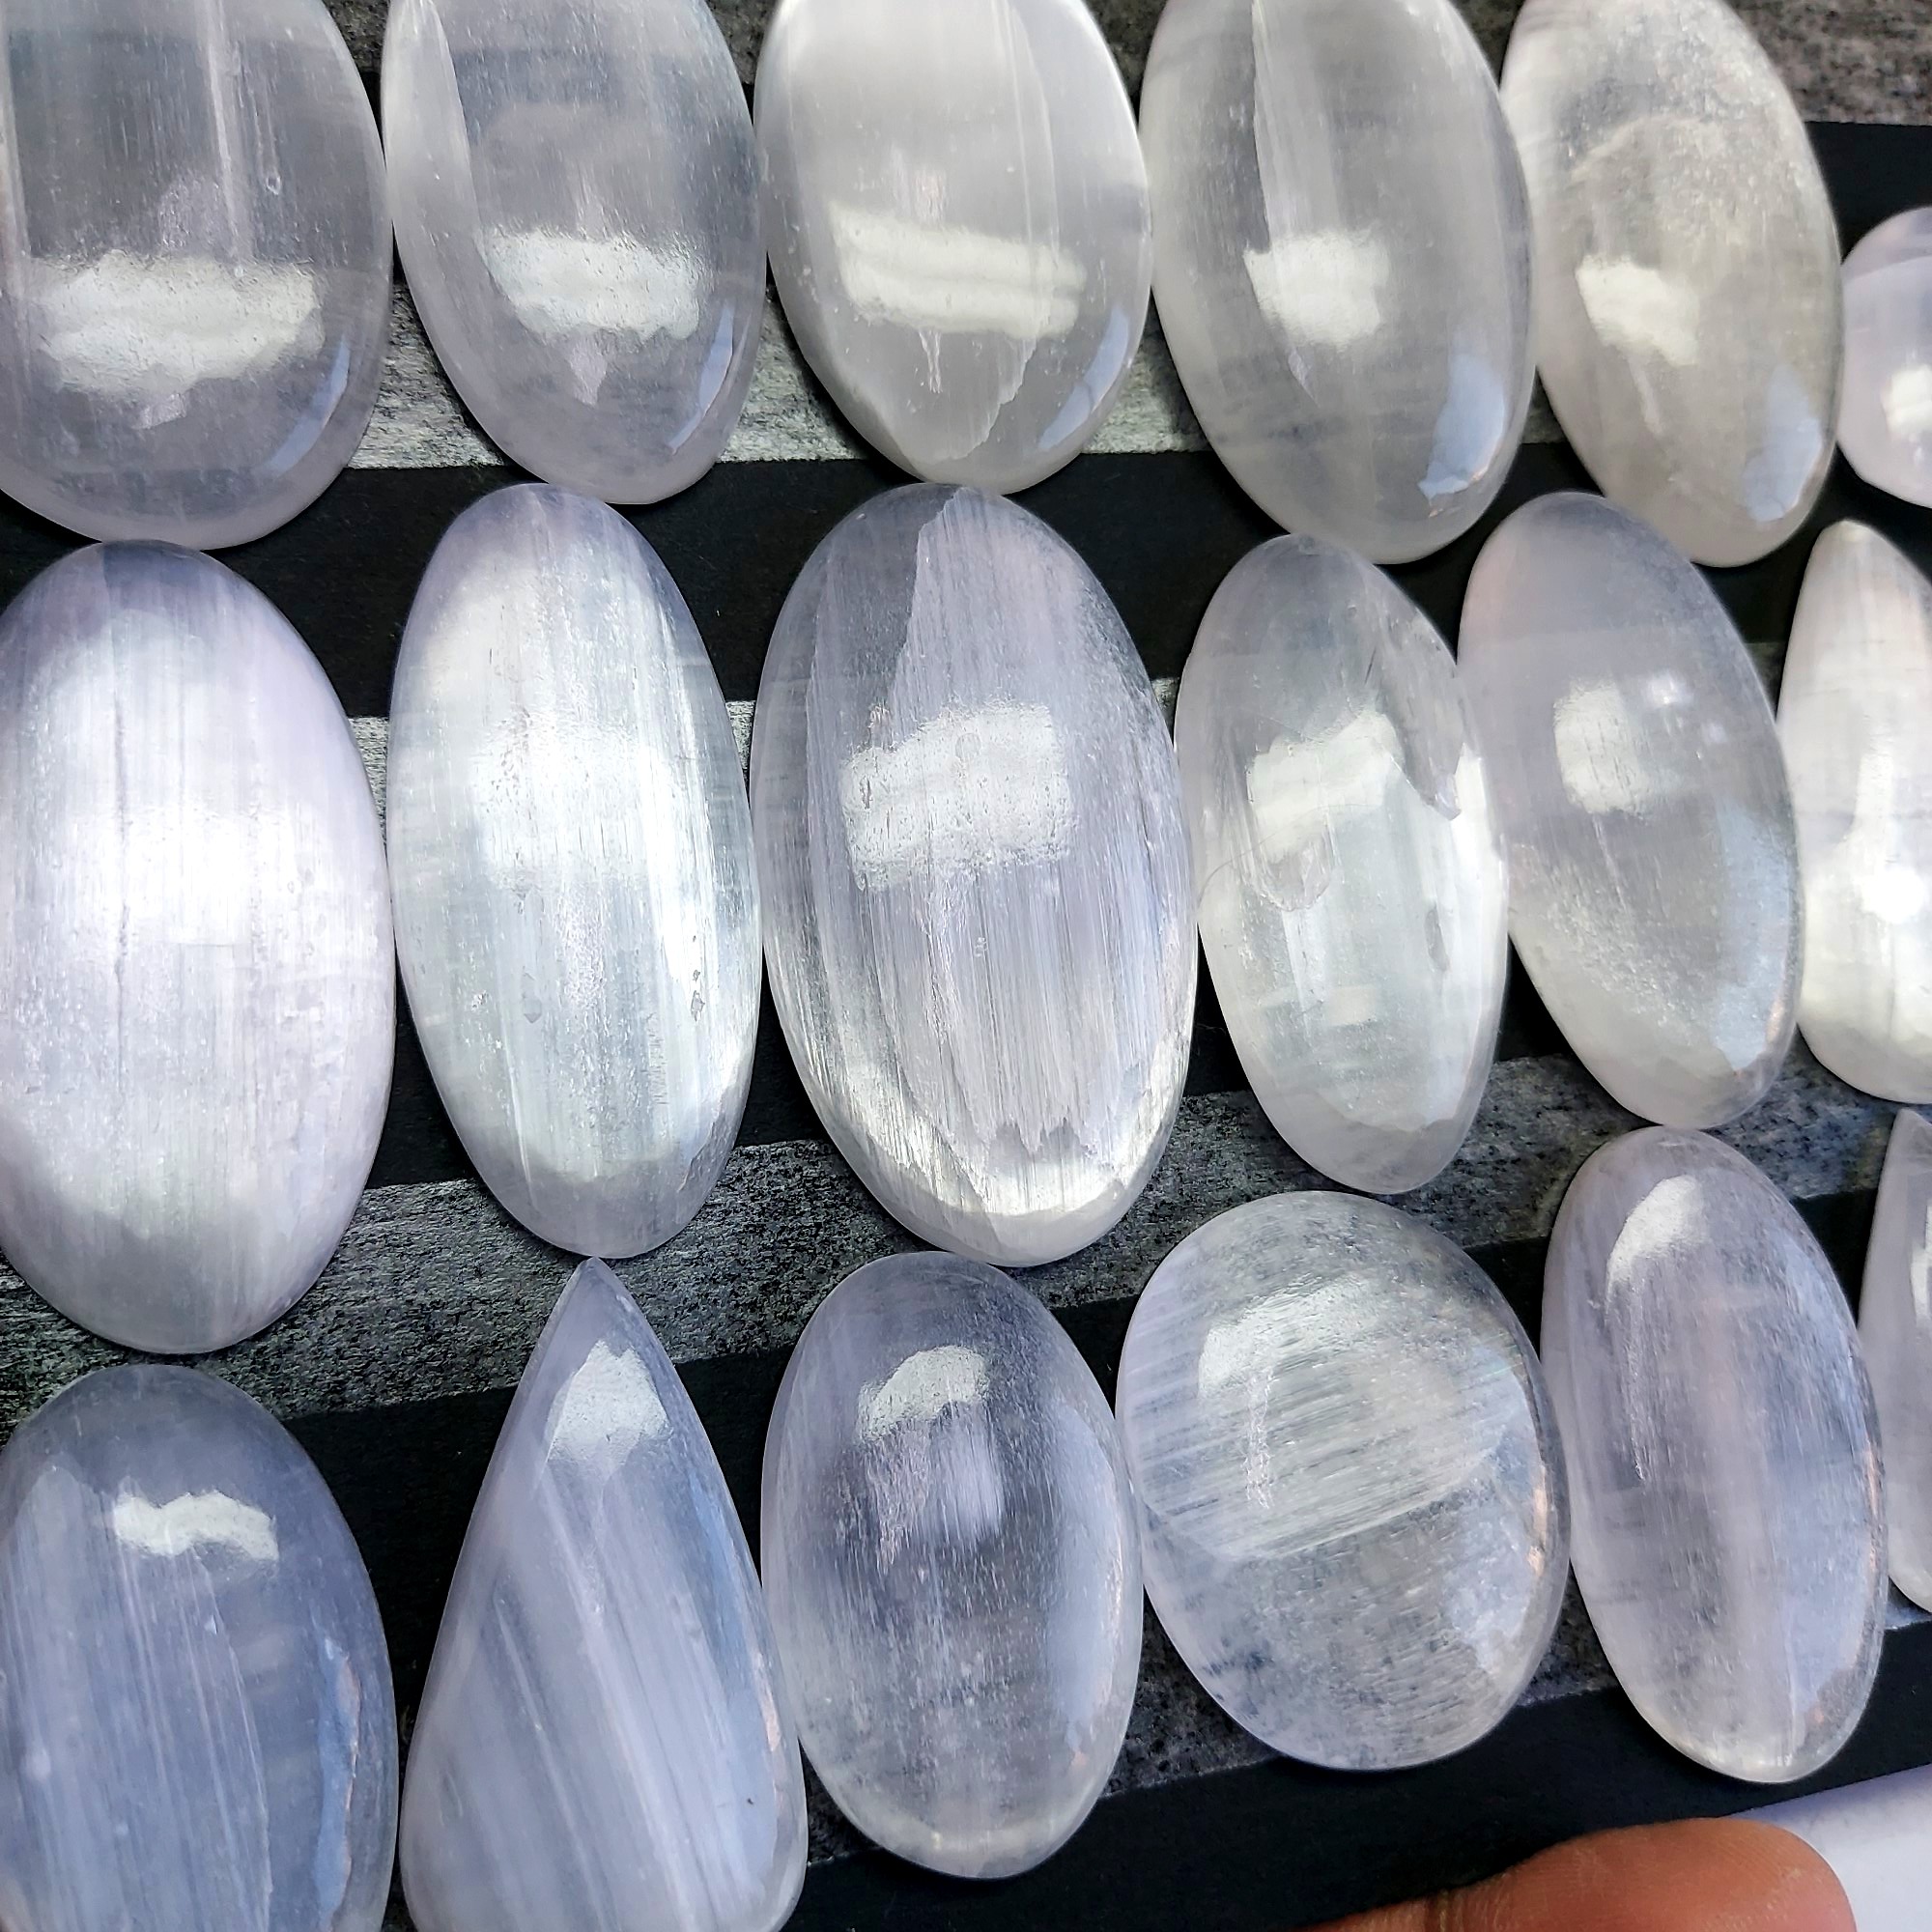 19pcs 1020Cts Natural White Selenite Loose Cabochon Lot  Gemstone For Jewelry Wholesale Lot Size 48x26 33x17mm